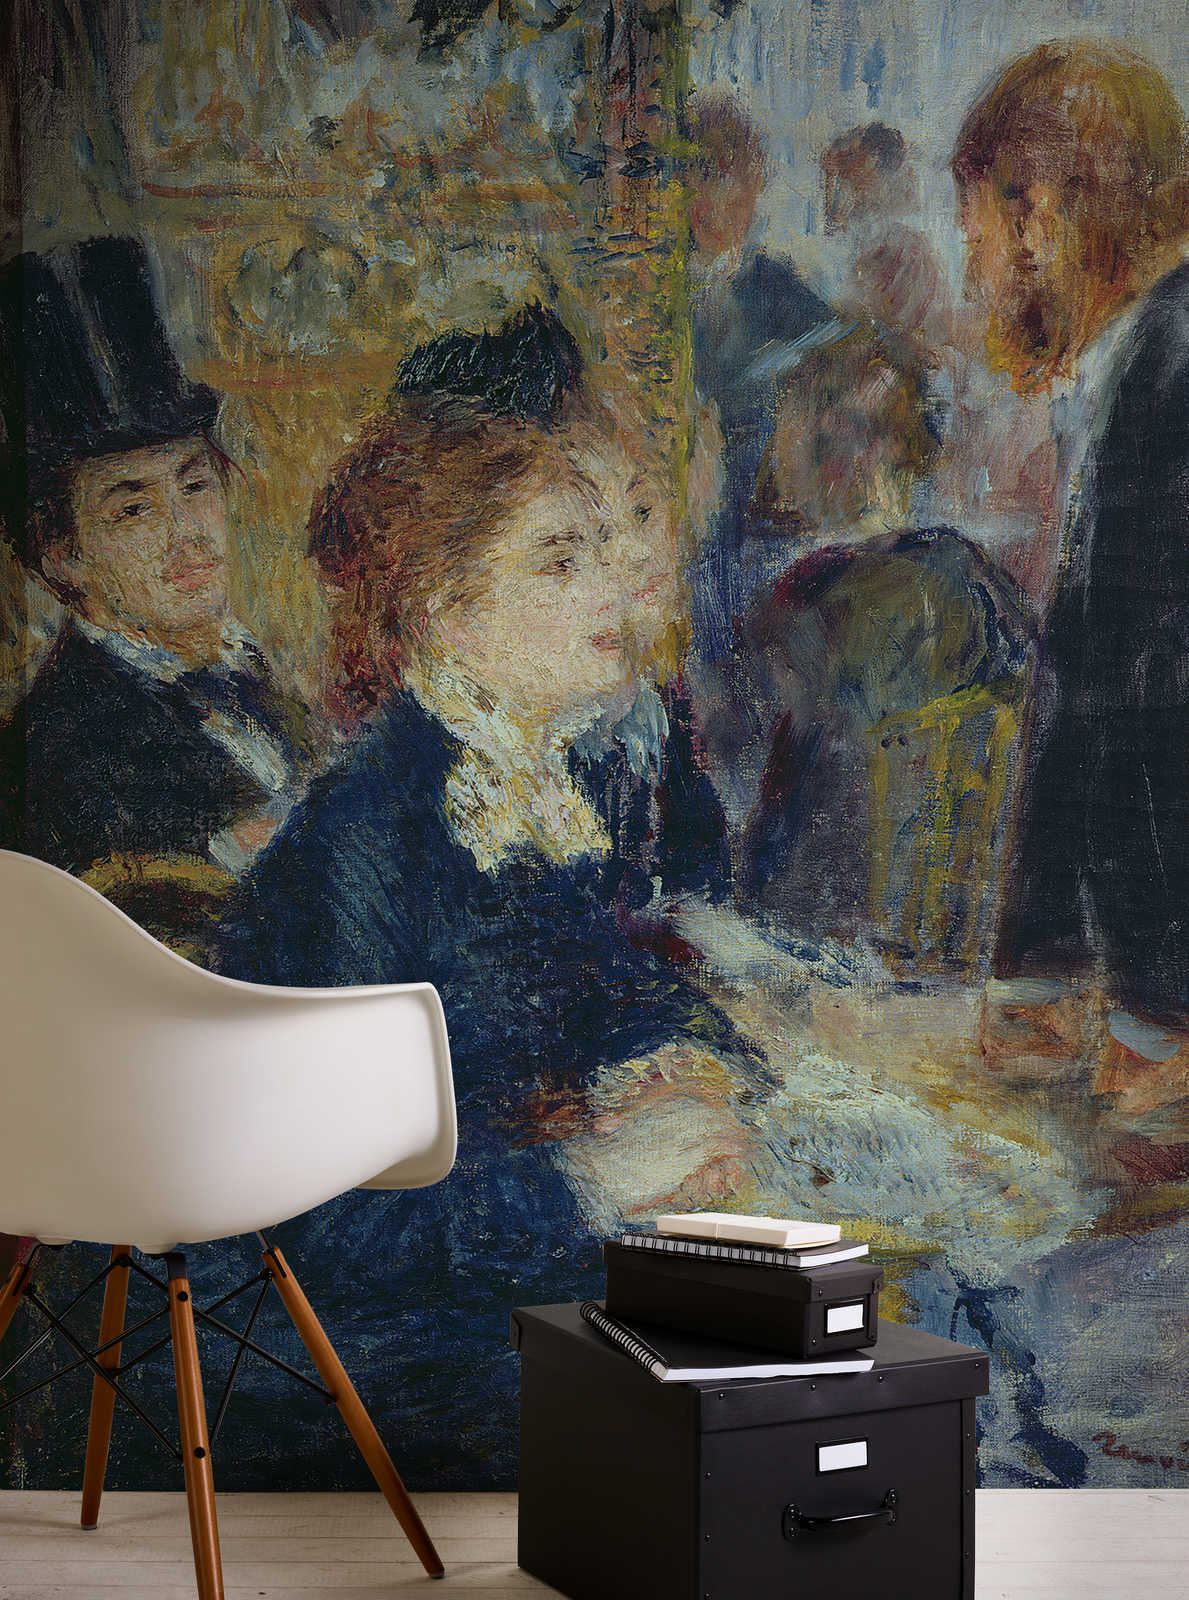             Photo wallpaper "In the coffee house around" by Pierre Auguste Renoir
        